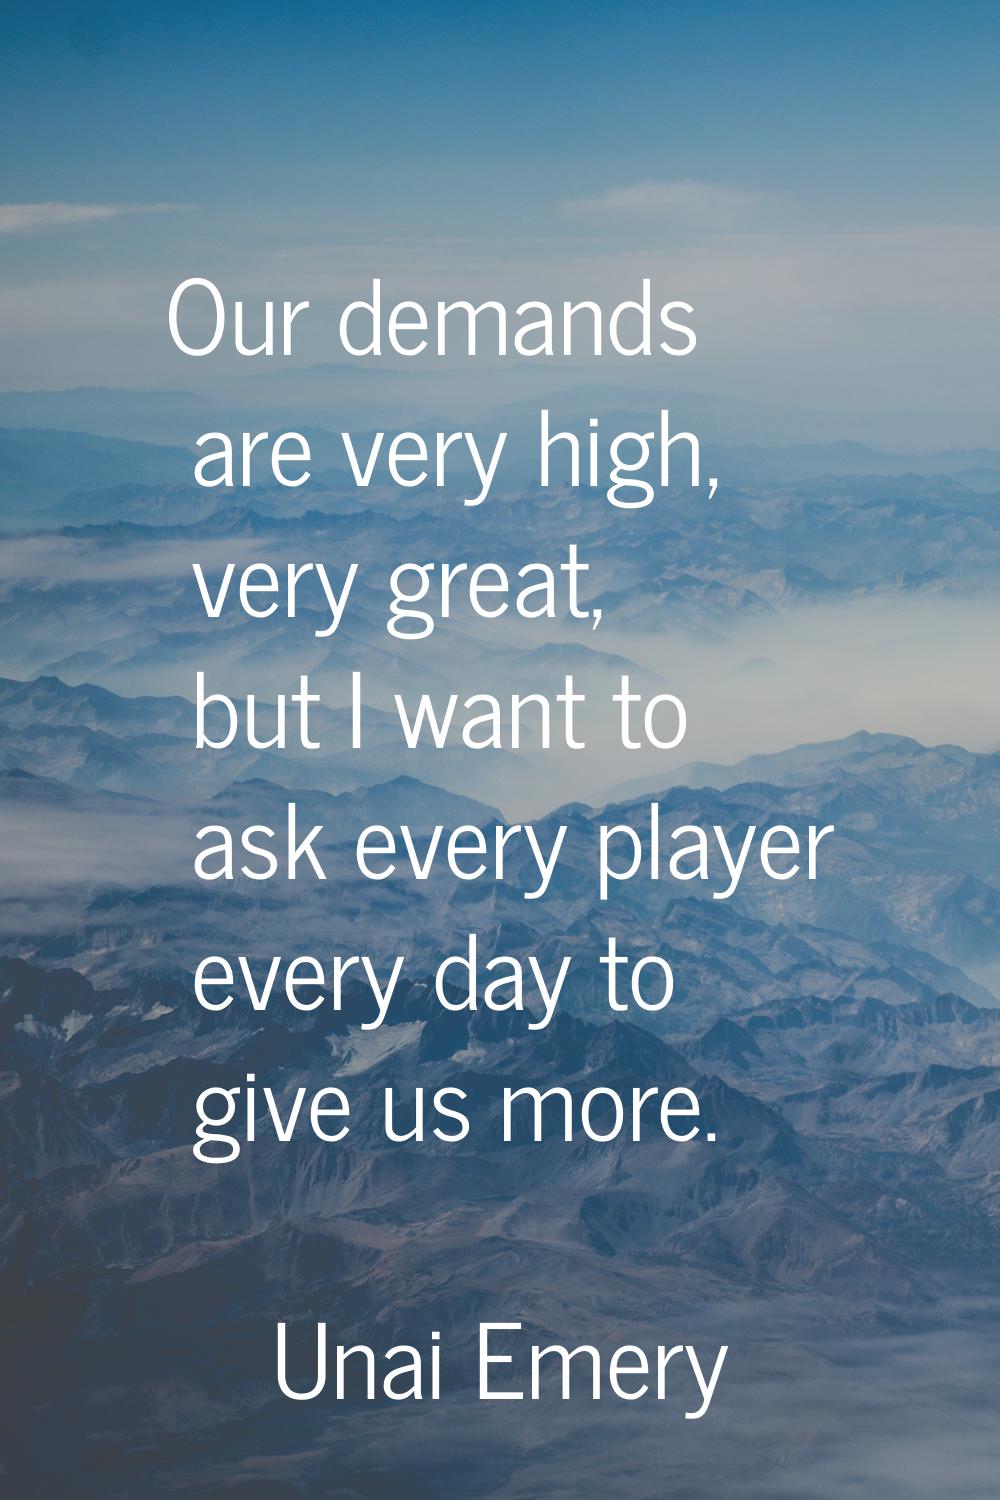 Our demands are very high, very great, but I want to ask every player every day to give us more.